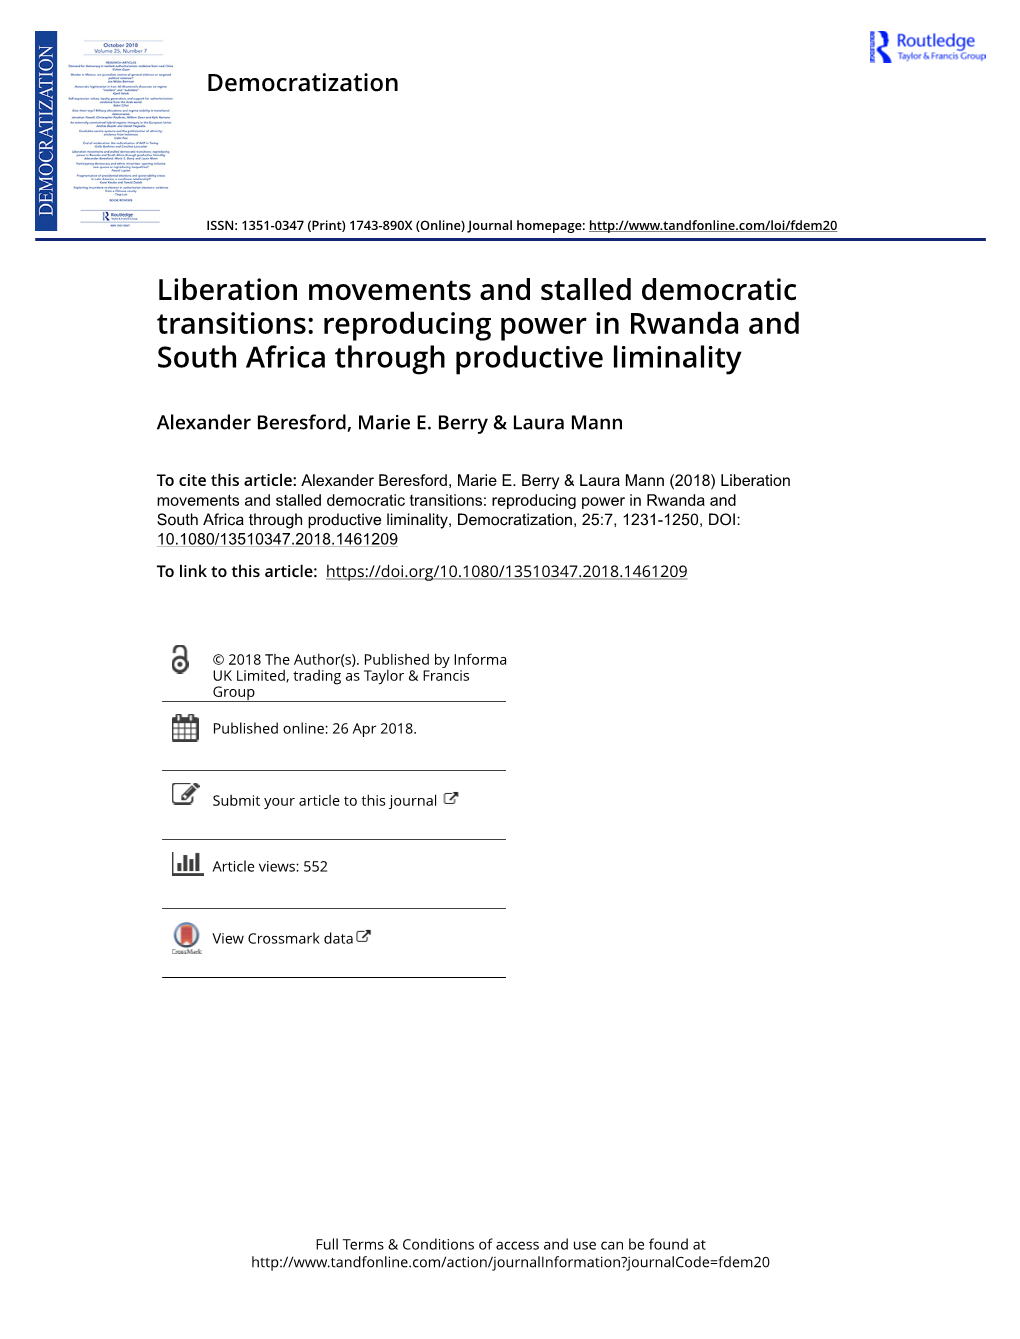 Liberation Movements and Stalled Democratic Transitions: Reproducing Power in Rwanda and South Africa Through Productive Liminality